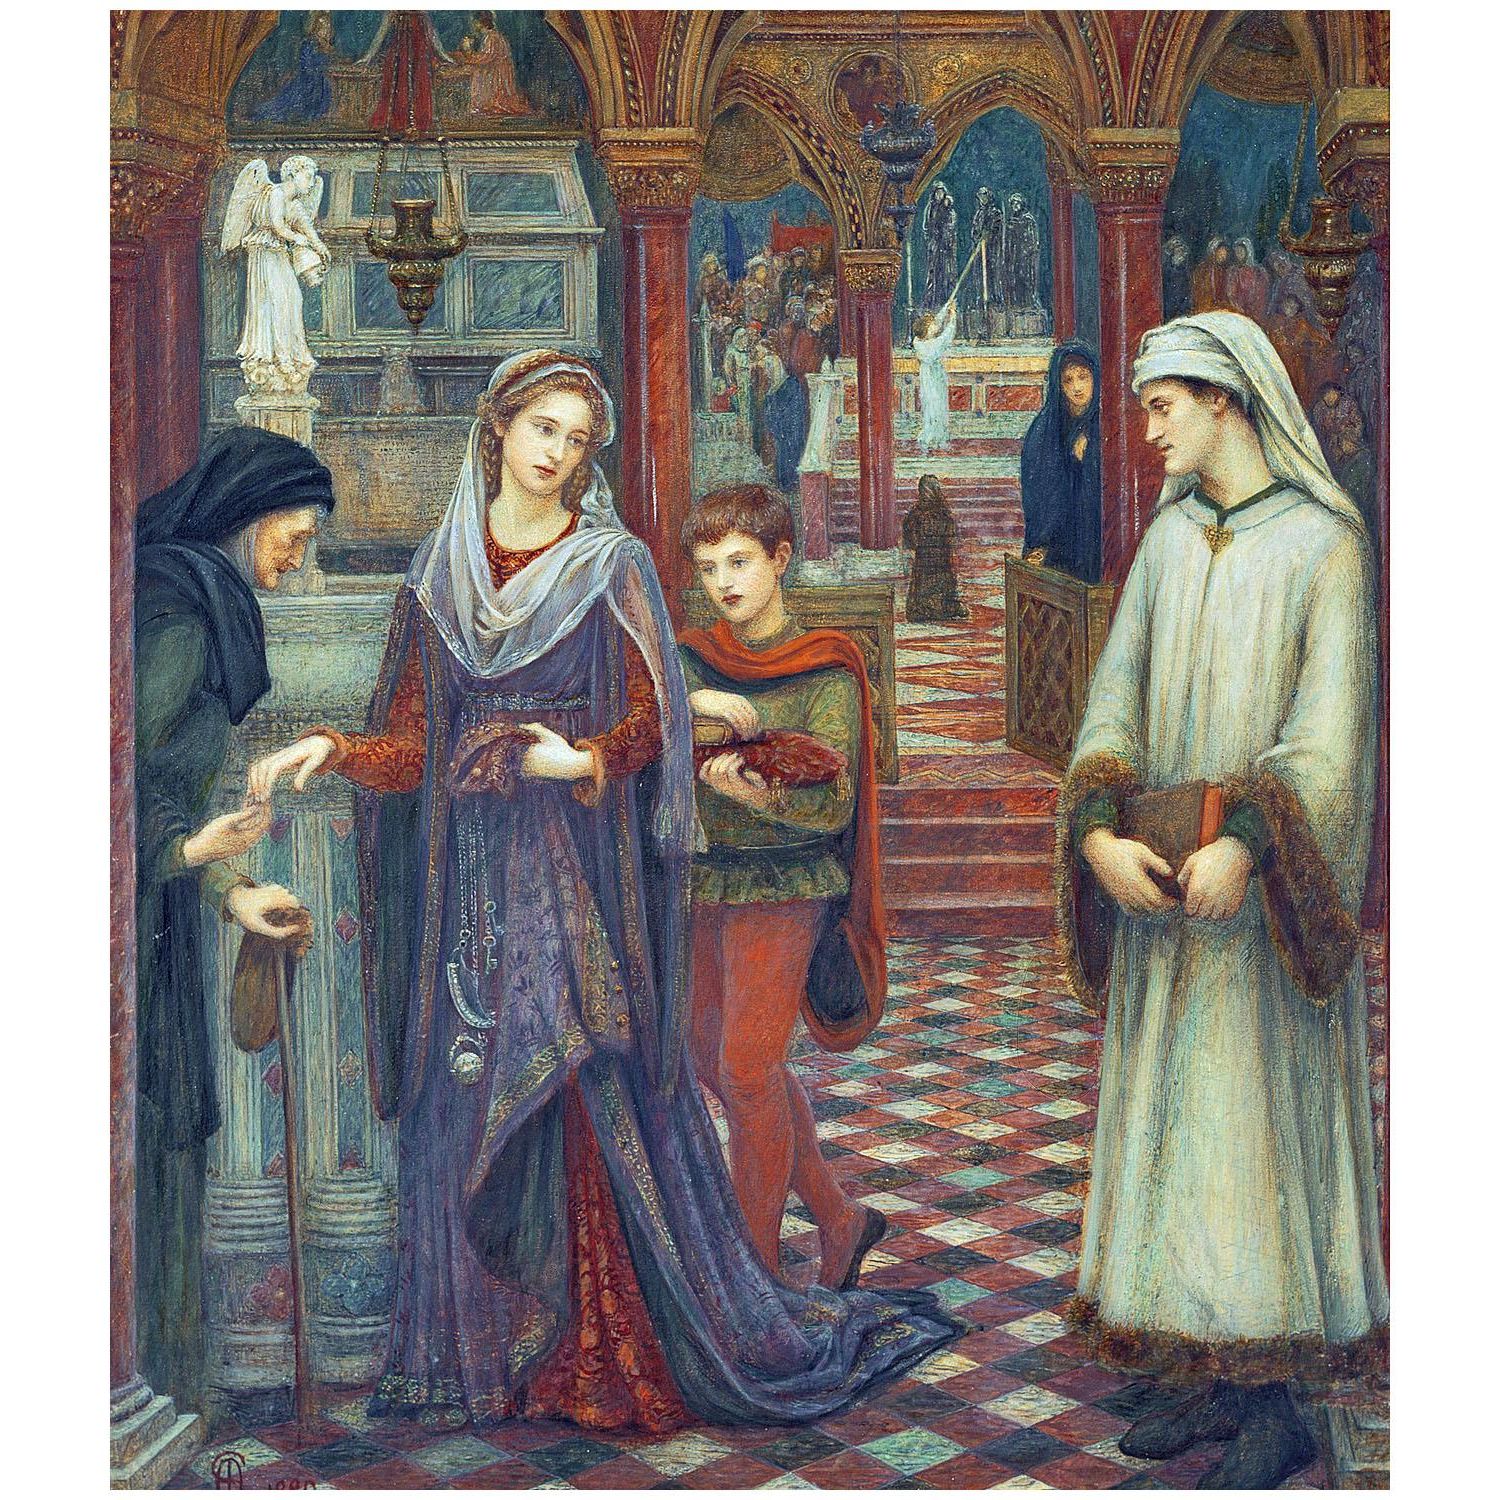 Marie Spartali. The First Meeting of Petrarch and Laura. 1889. Nationalmuseum Stockholm